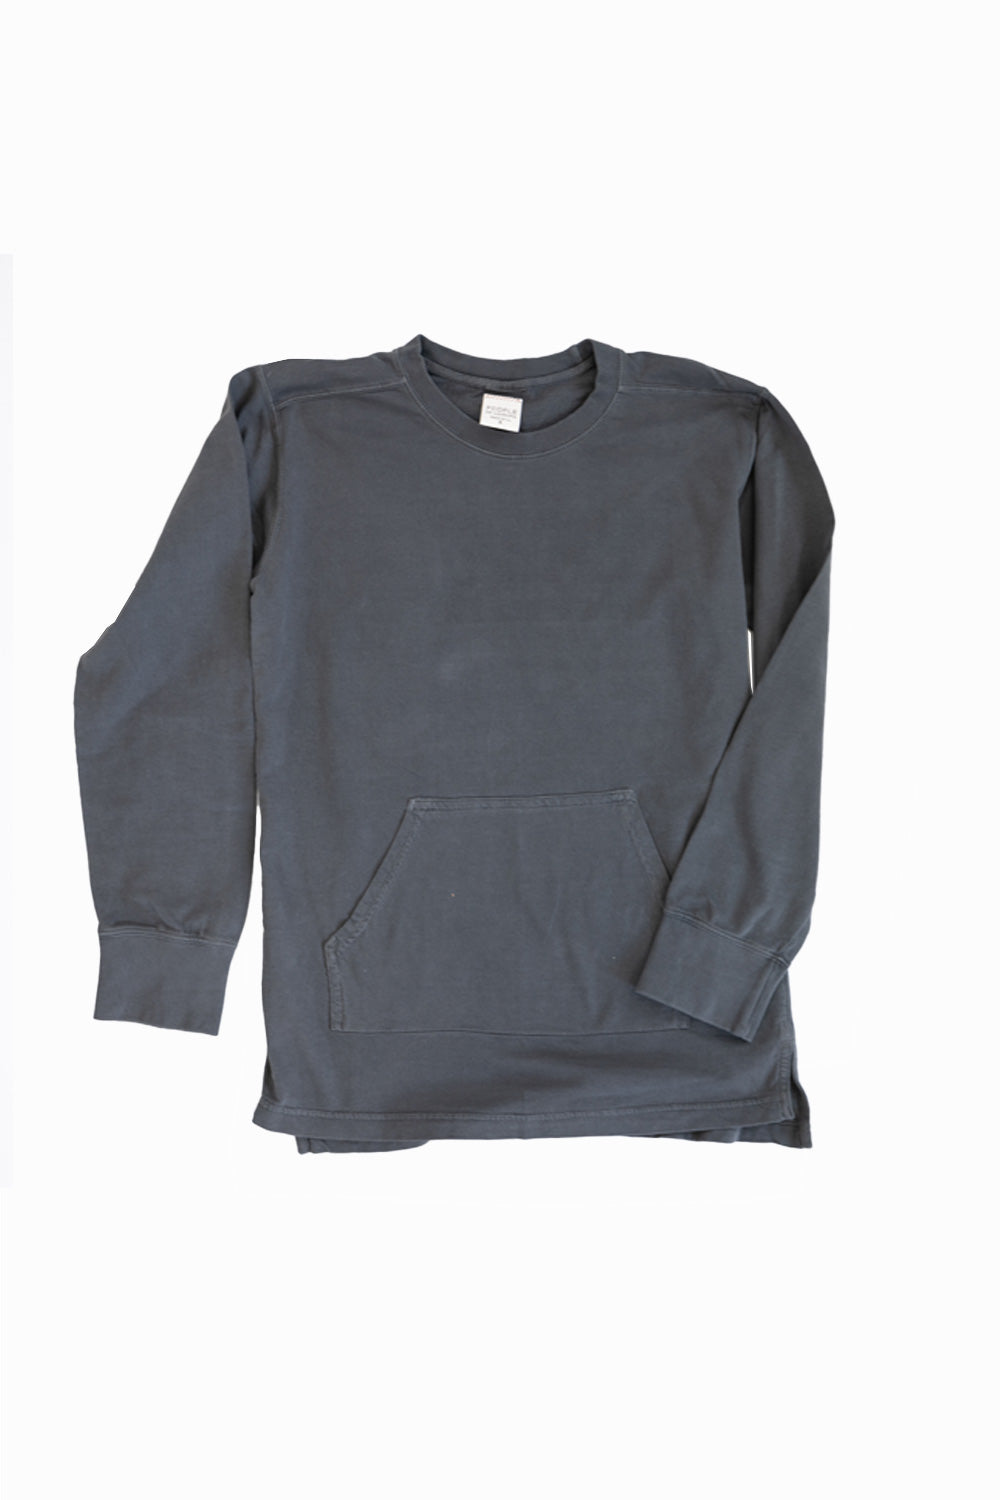 The Essential Sweatshirt With Pocket